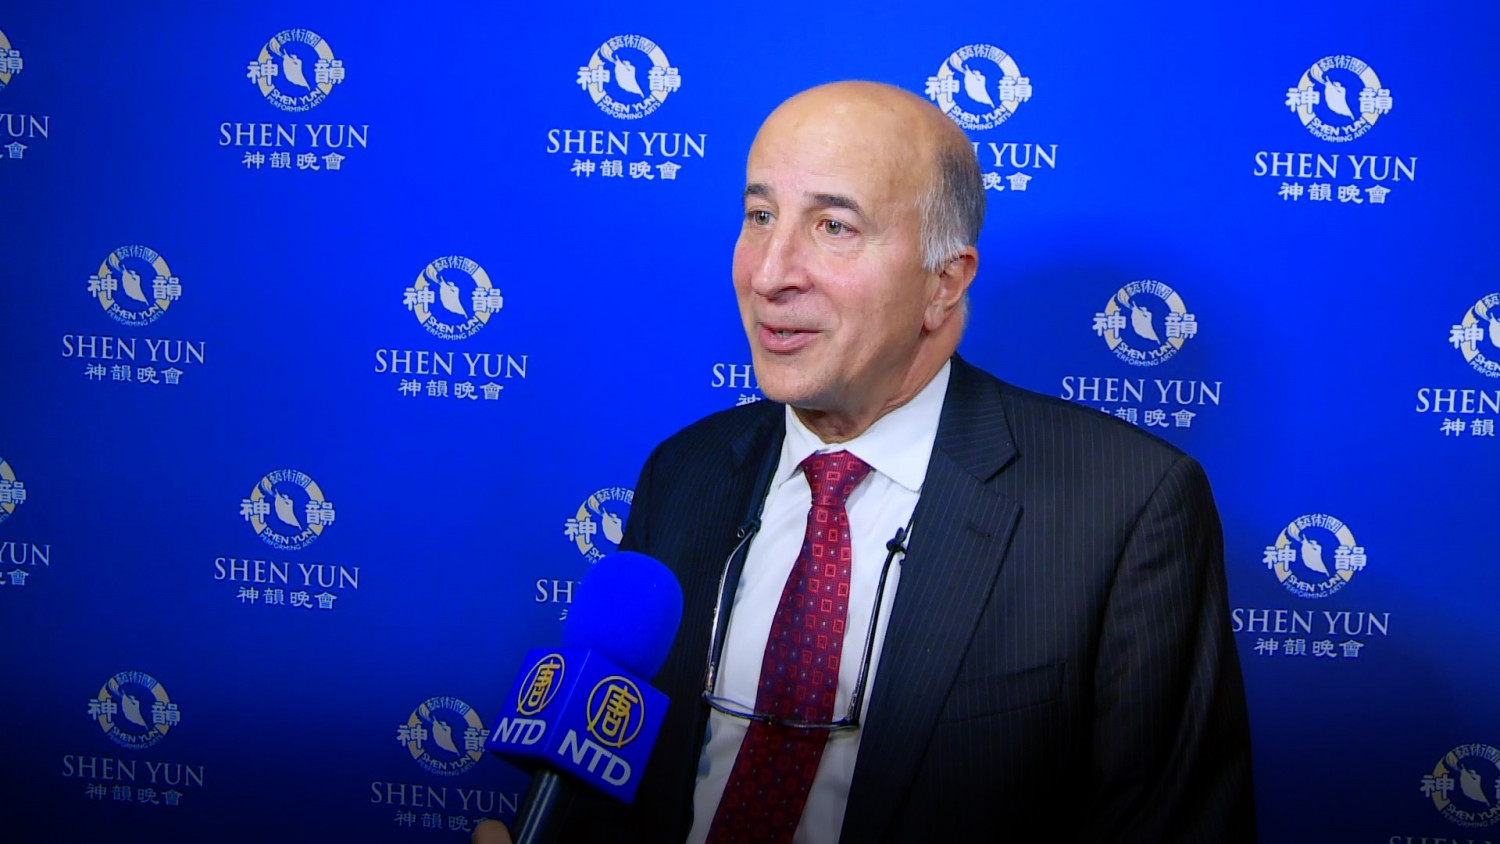 City Councilman: Divinity and Morality Shines Through Shen Yun Dancers